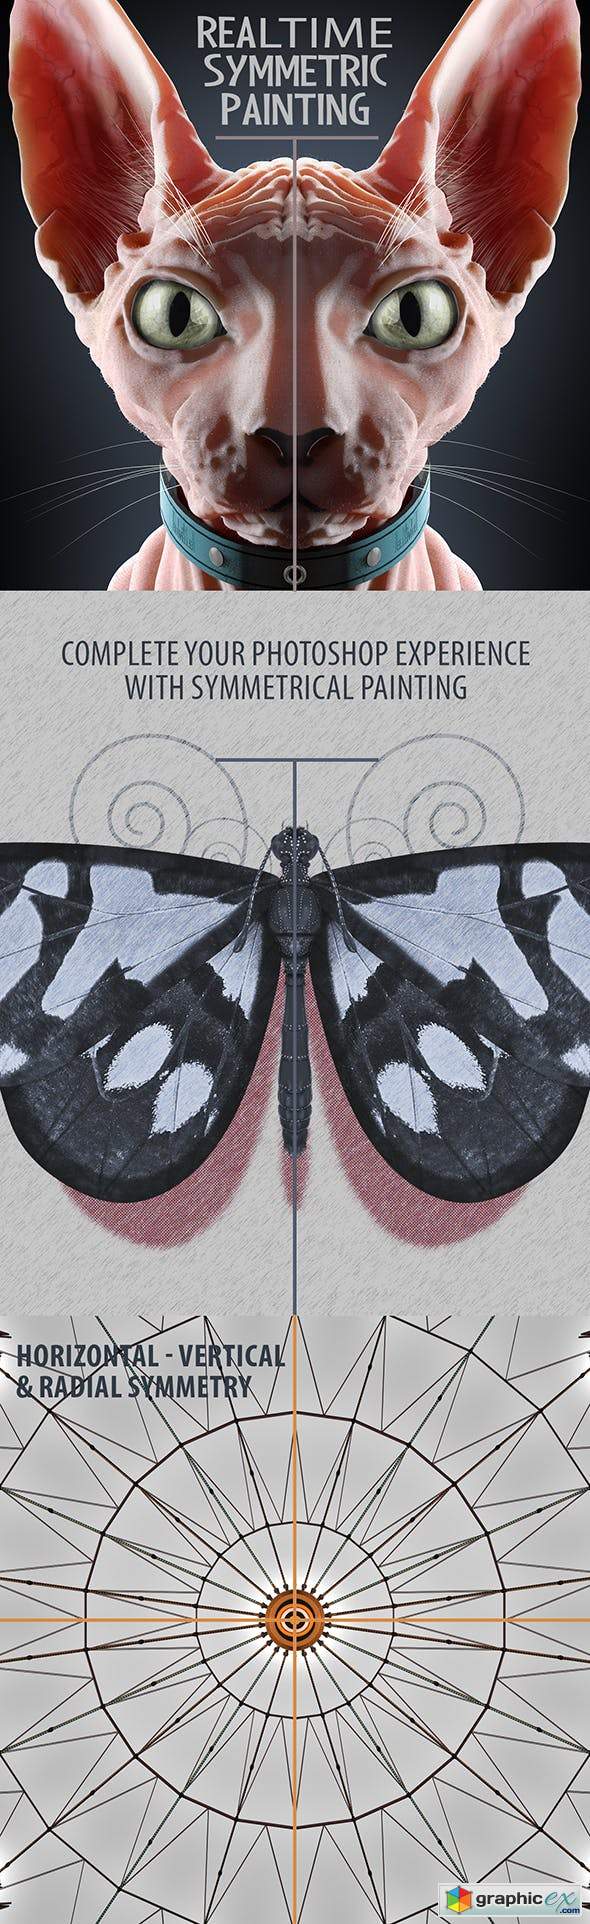 Realtime Symmetry Painting